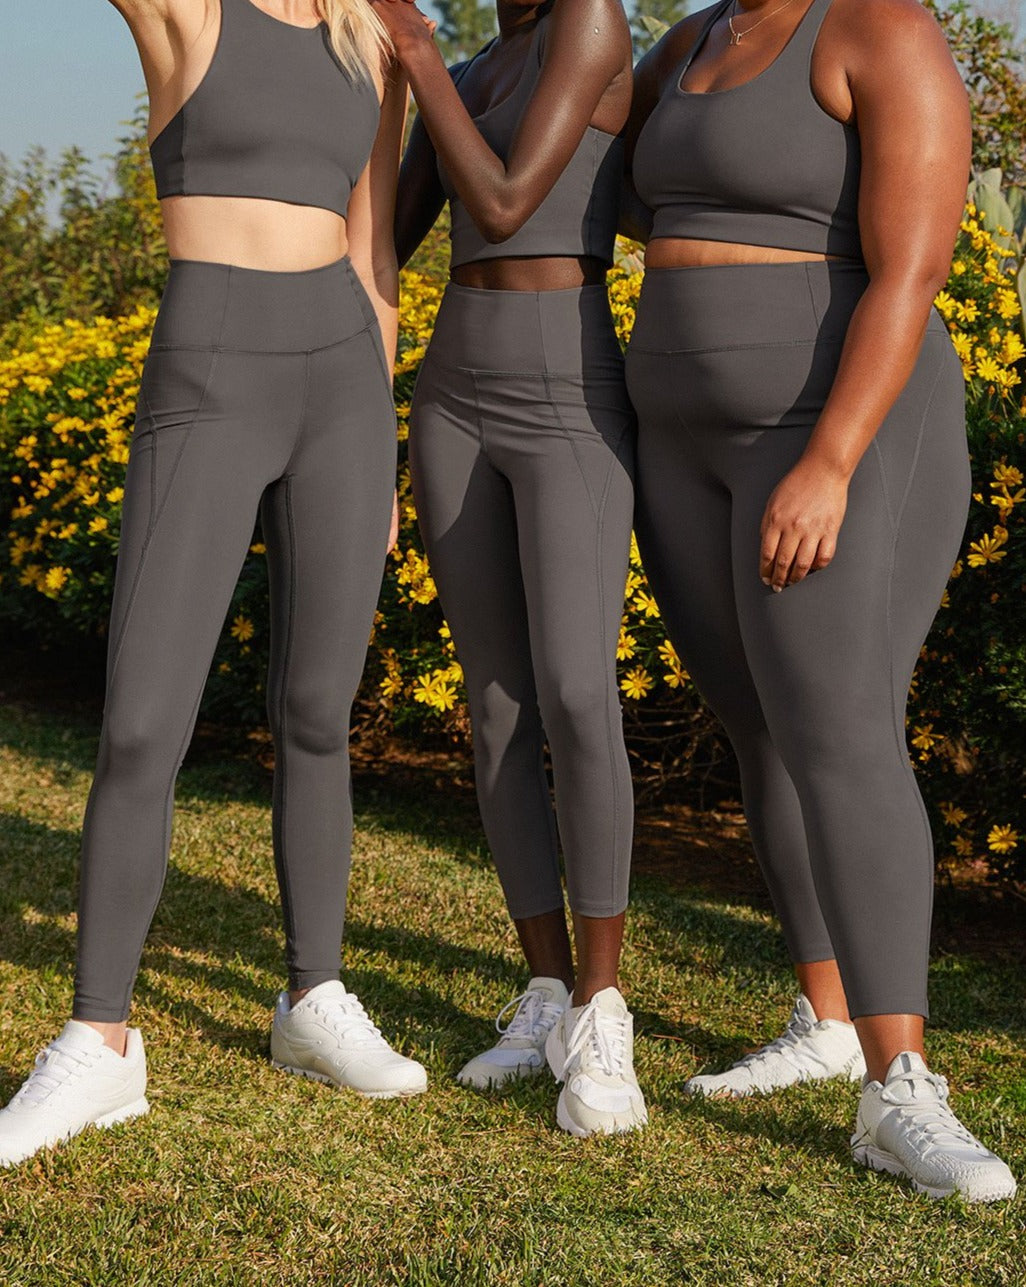 Fabletics ad 2020 😌 I honestly DO love these leggings - my favorite part  about them is the shapewear support. I love doing commercial